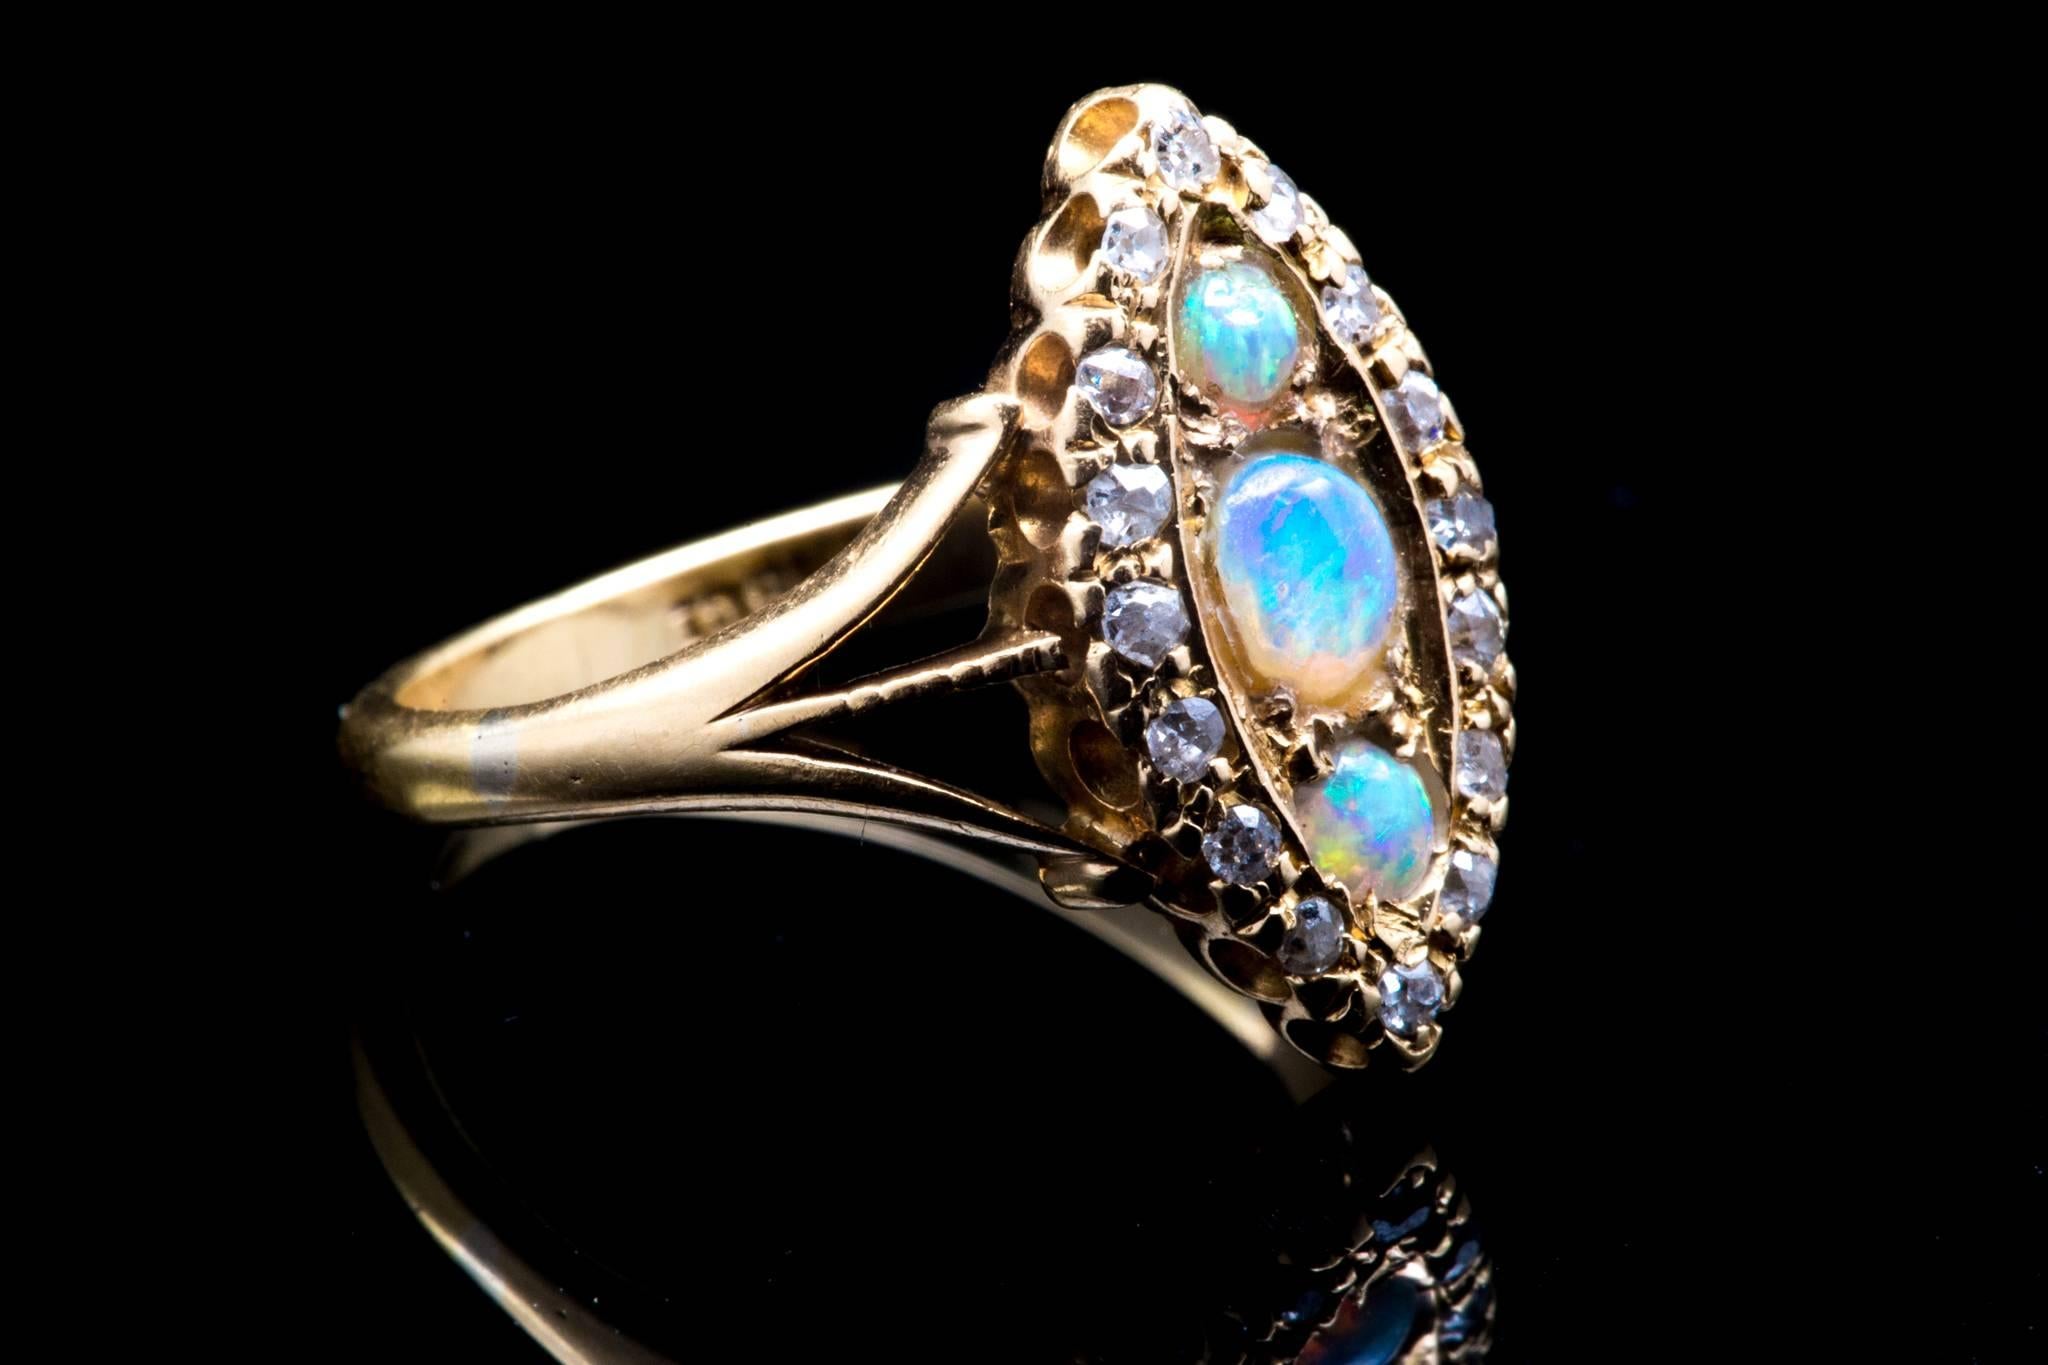 An opal and diamond trilogy ring in 18 karat yellow gold.  Centered by a trio of Australian opals this ring features a halo of pave set mine cut diamonds in rich 18 karat yellow gold.  

Grading as beautiful VS/SI clarity and G/H color, the antique